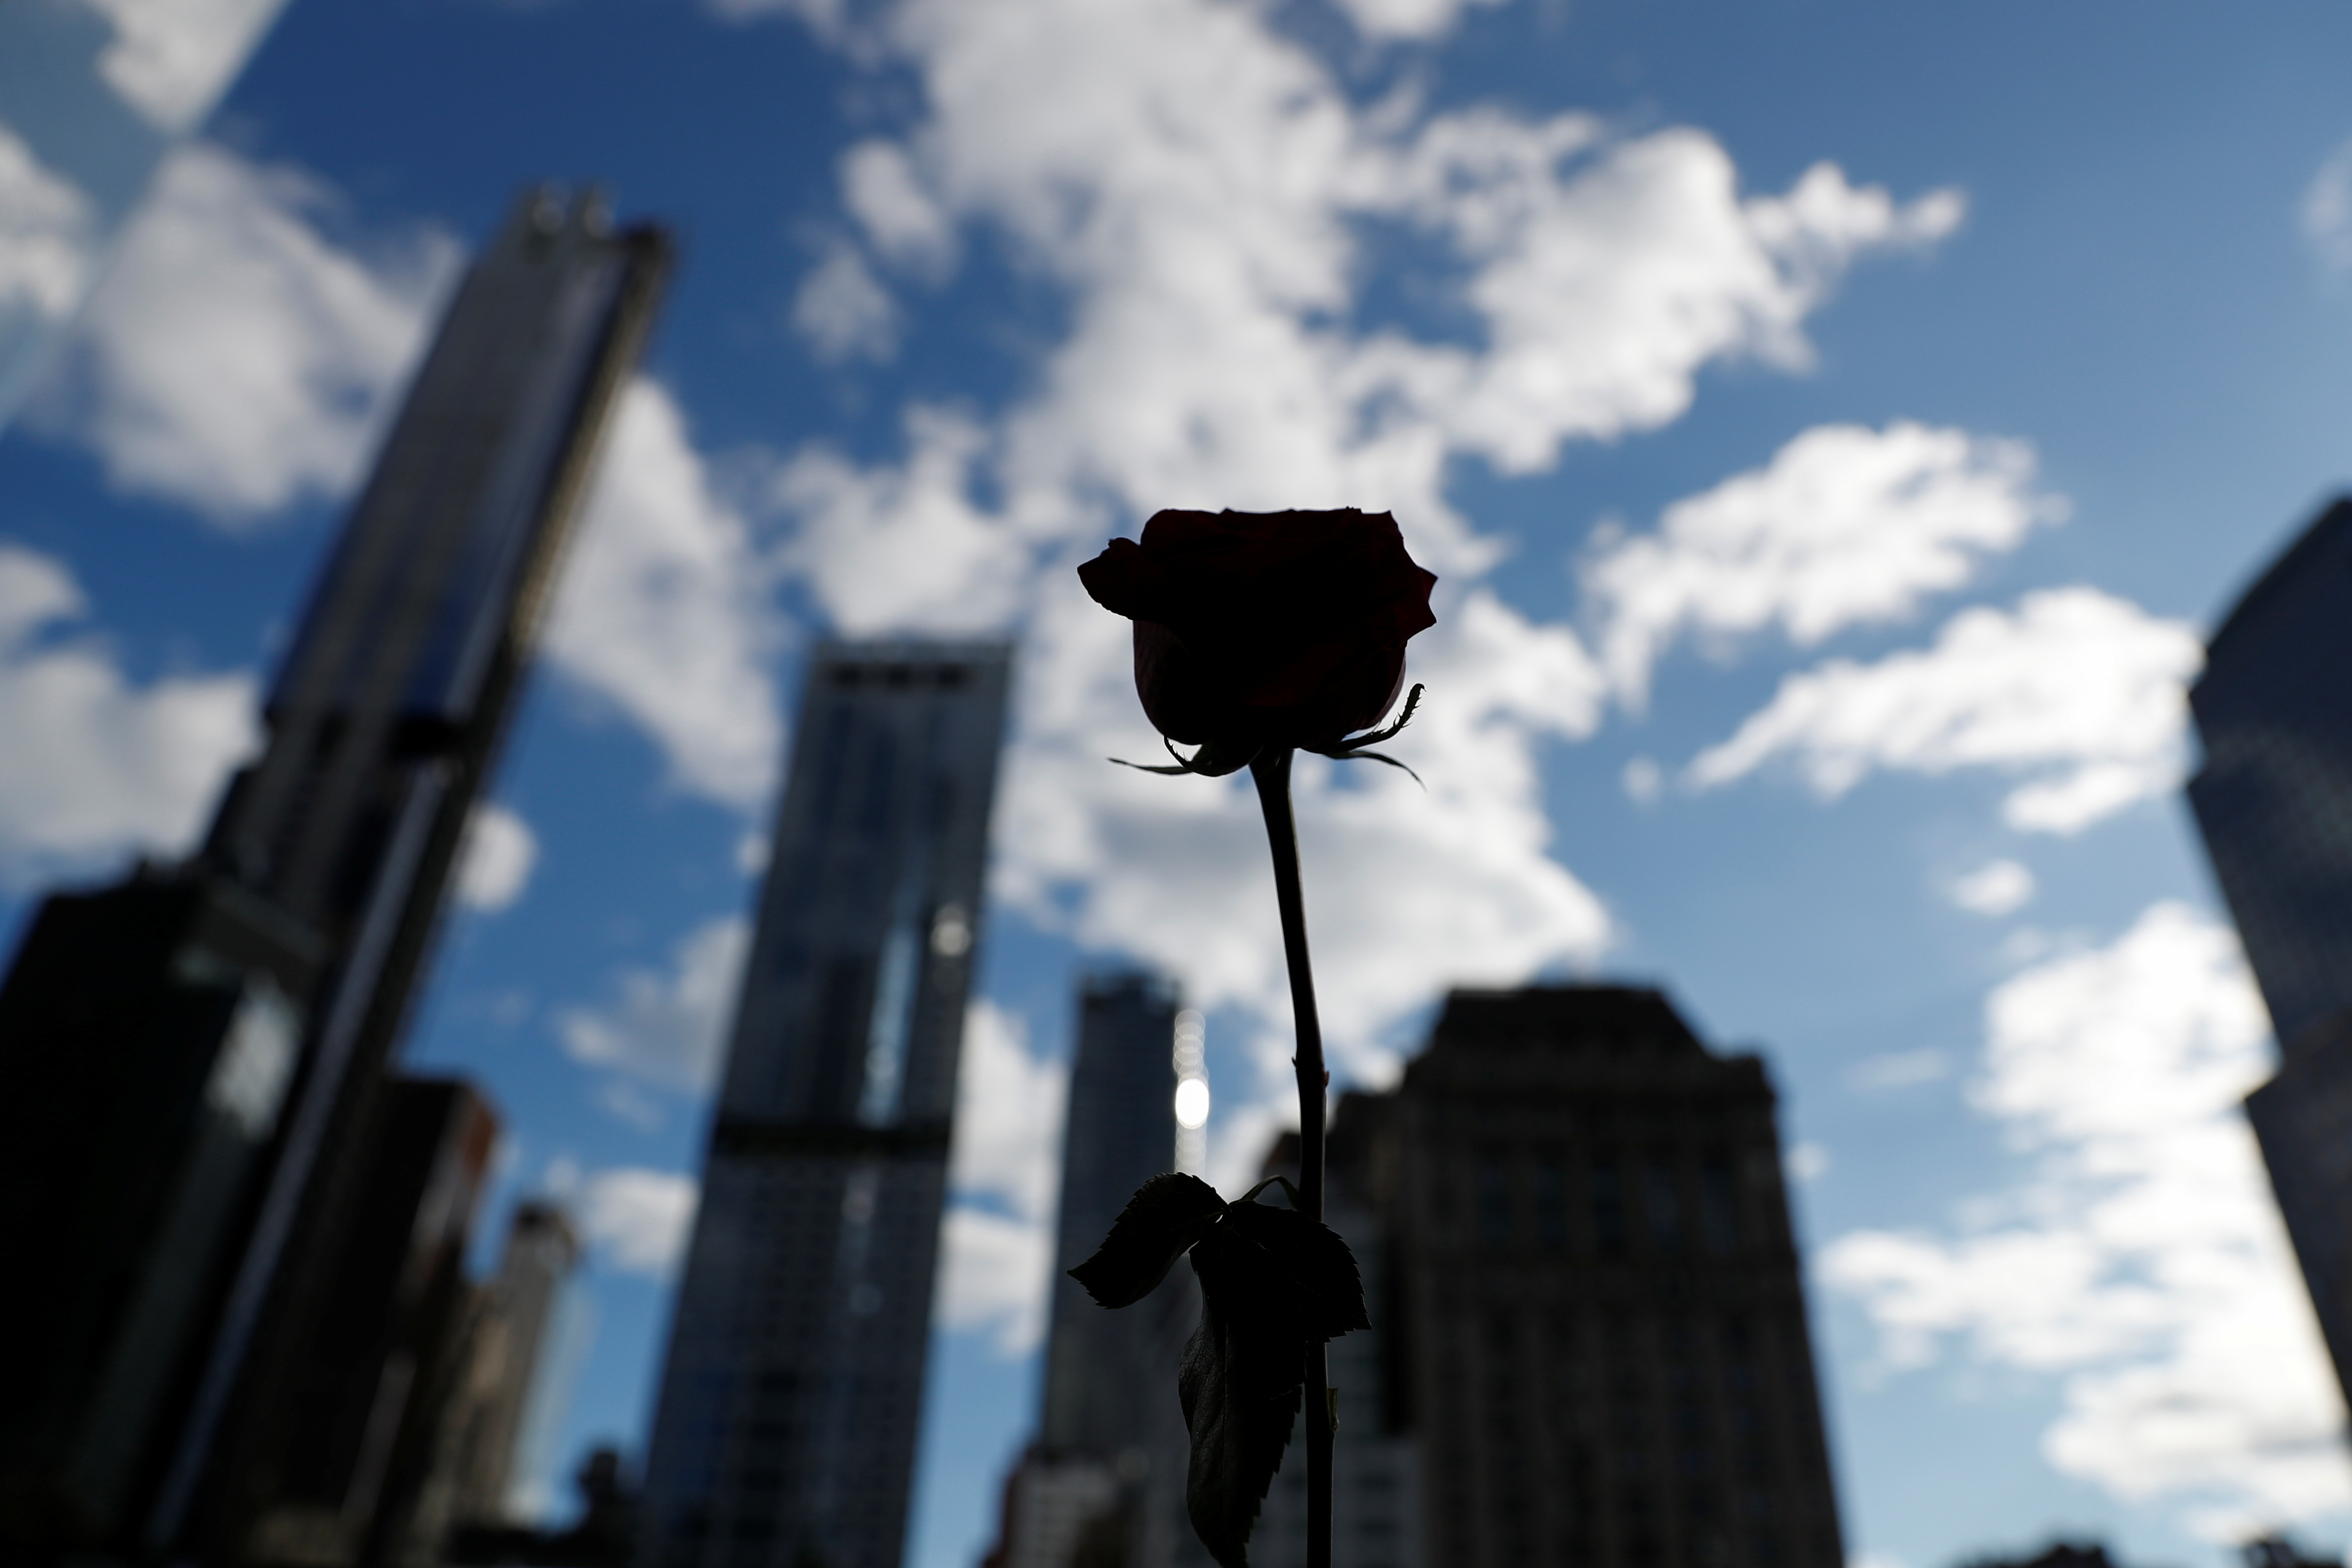 A flower seen in silhouette stands on the south reflecting pool at the 9/11 Memorial site in the lower section of Manhattan, New York City